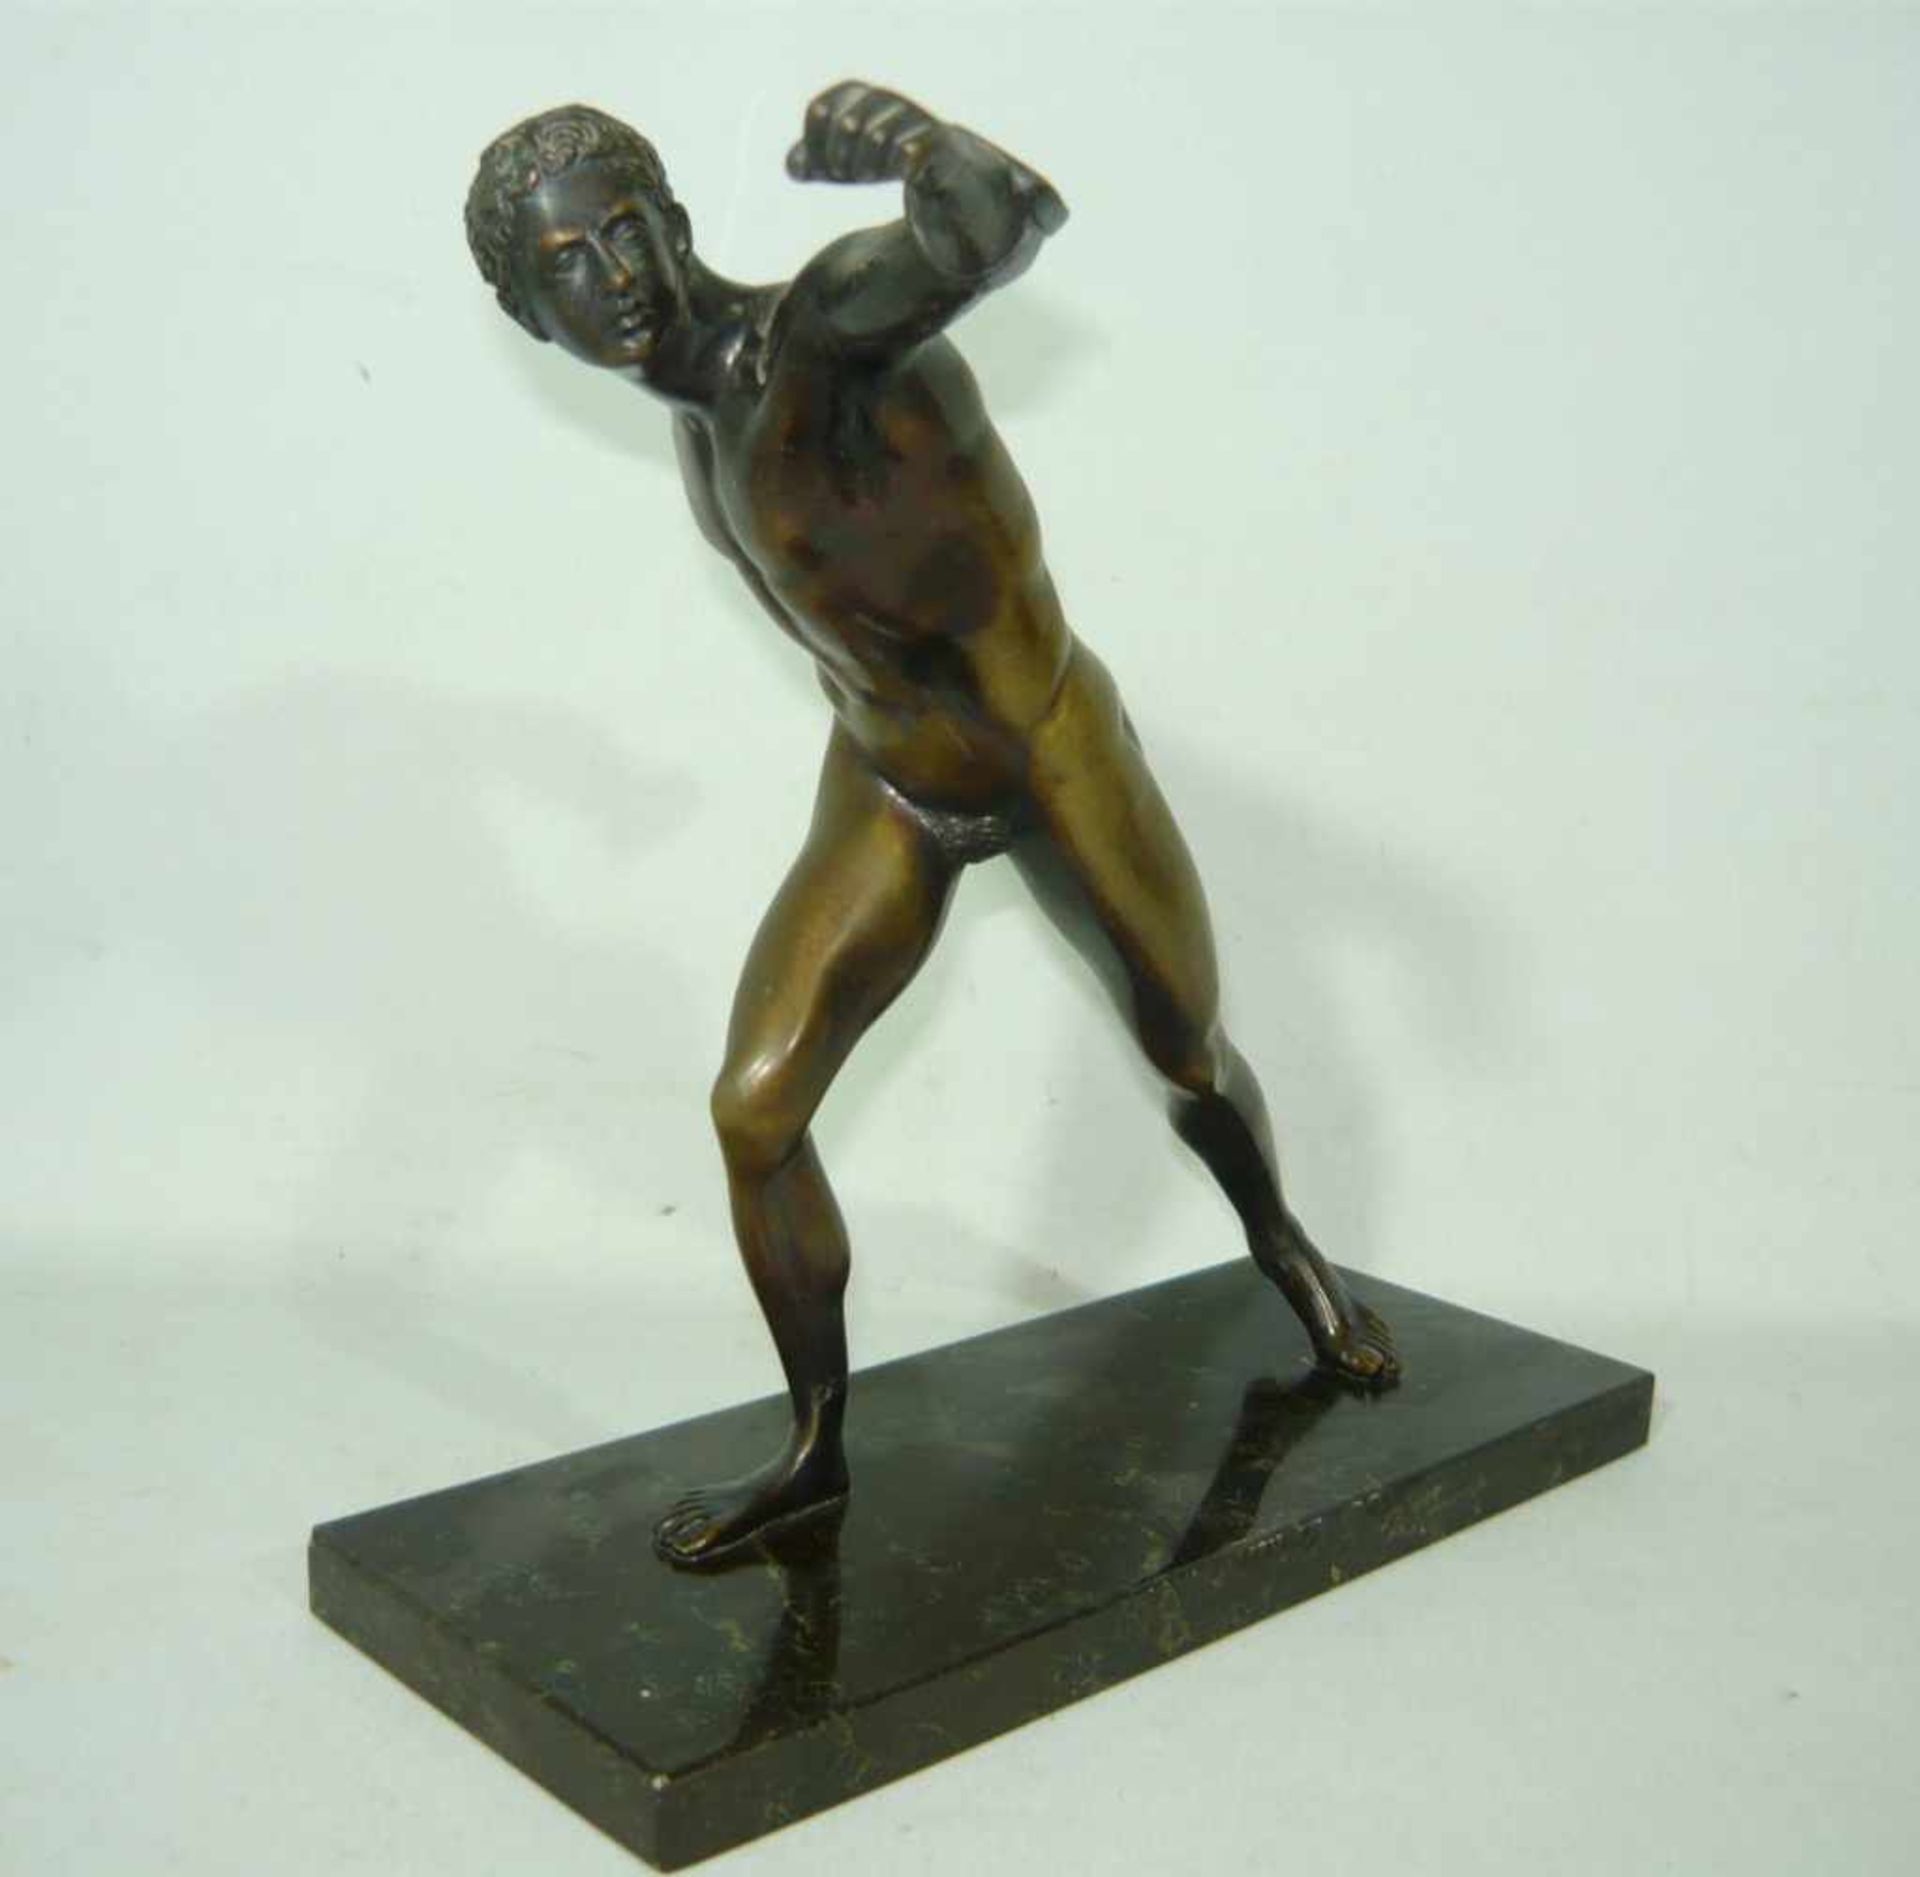 Großer Faustkämpfer auf Steinsockel. Metall. L. ca. 32 cm. Large boxing athlete on a stone mounting.